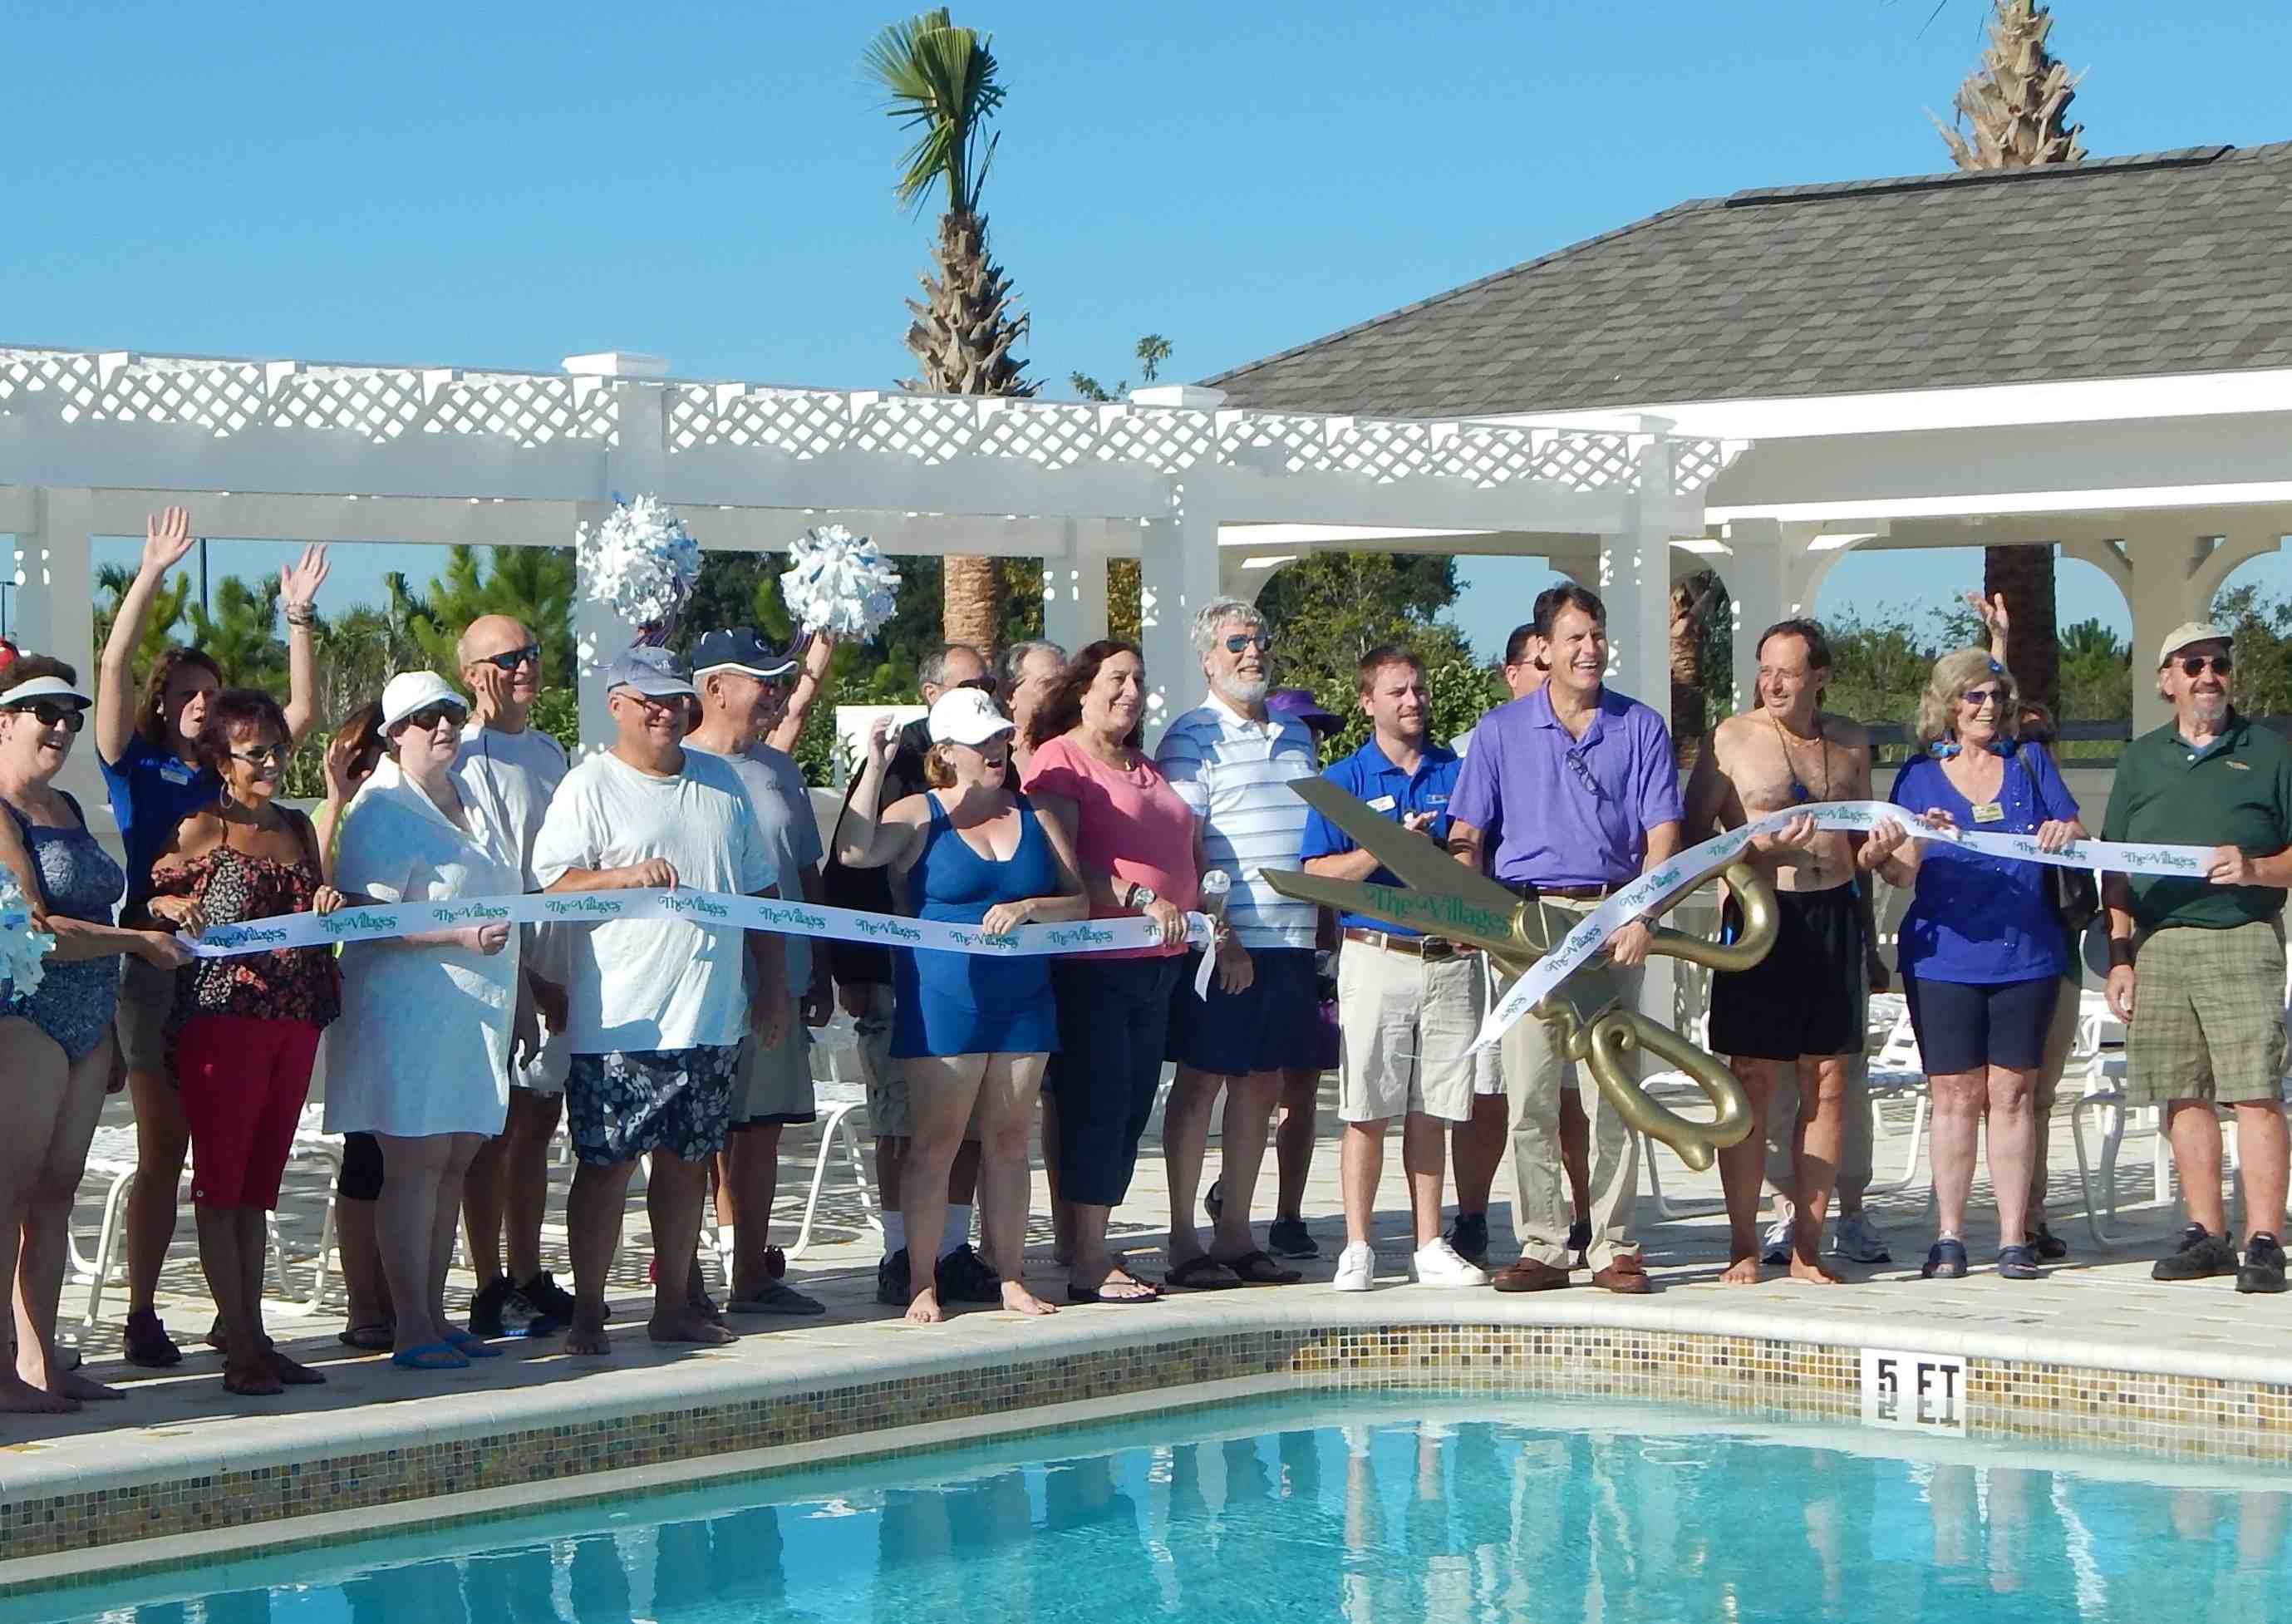 Ribbon cut in Osceola Hills, marking opening of Villages’ 78th swimming pool